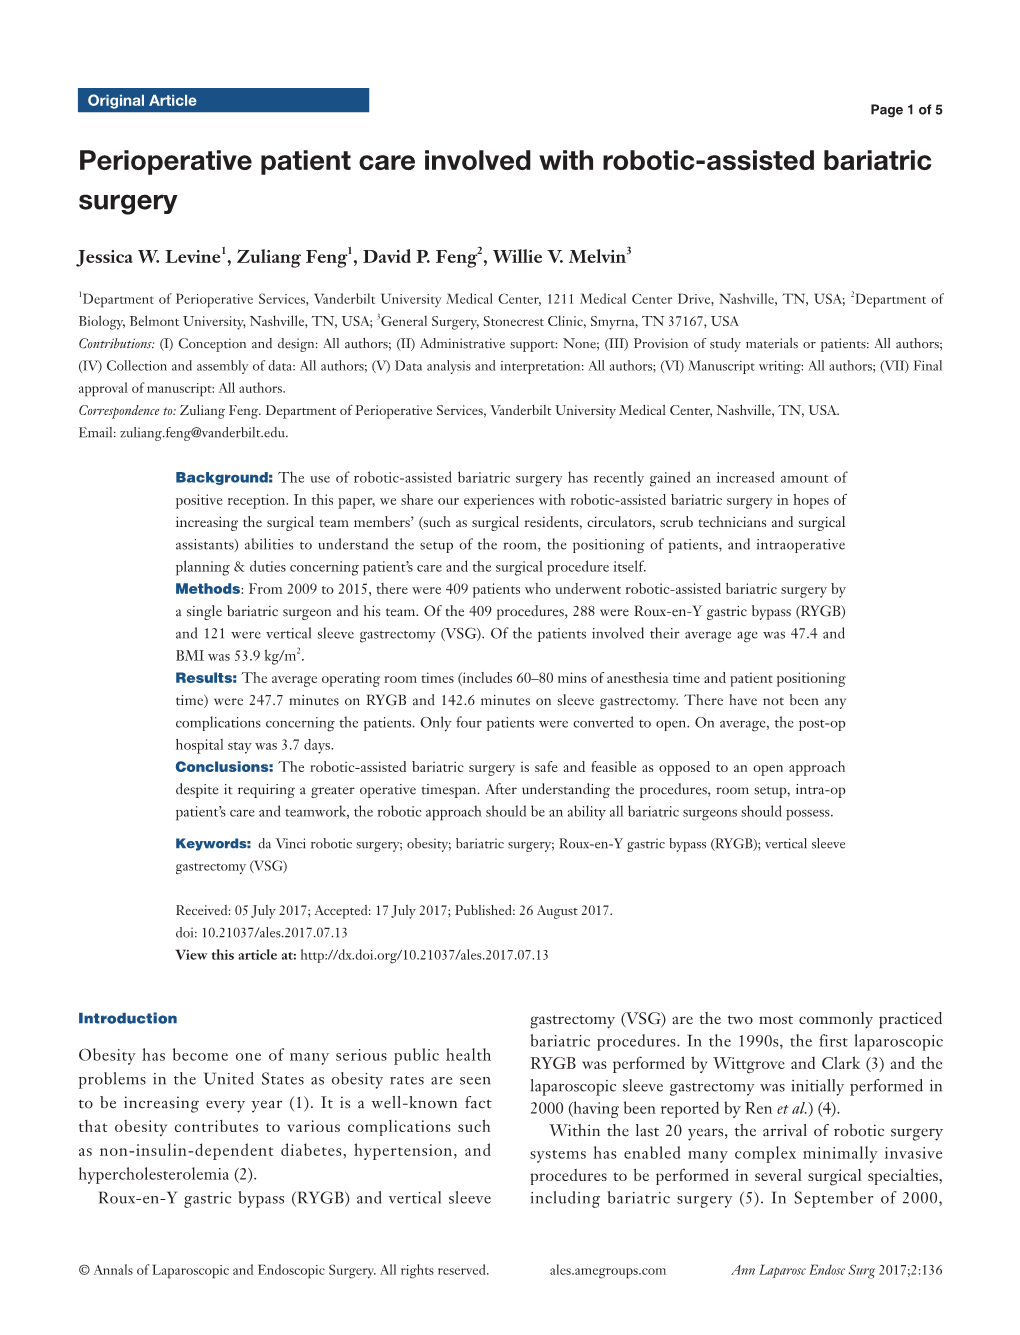 Perioperative Patient Care Involved with Robotic-Assisted Bariatric Surgery